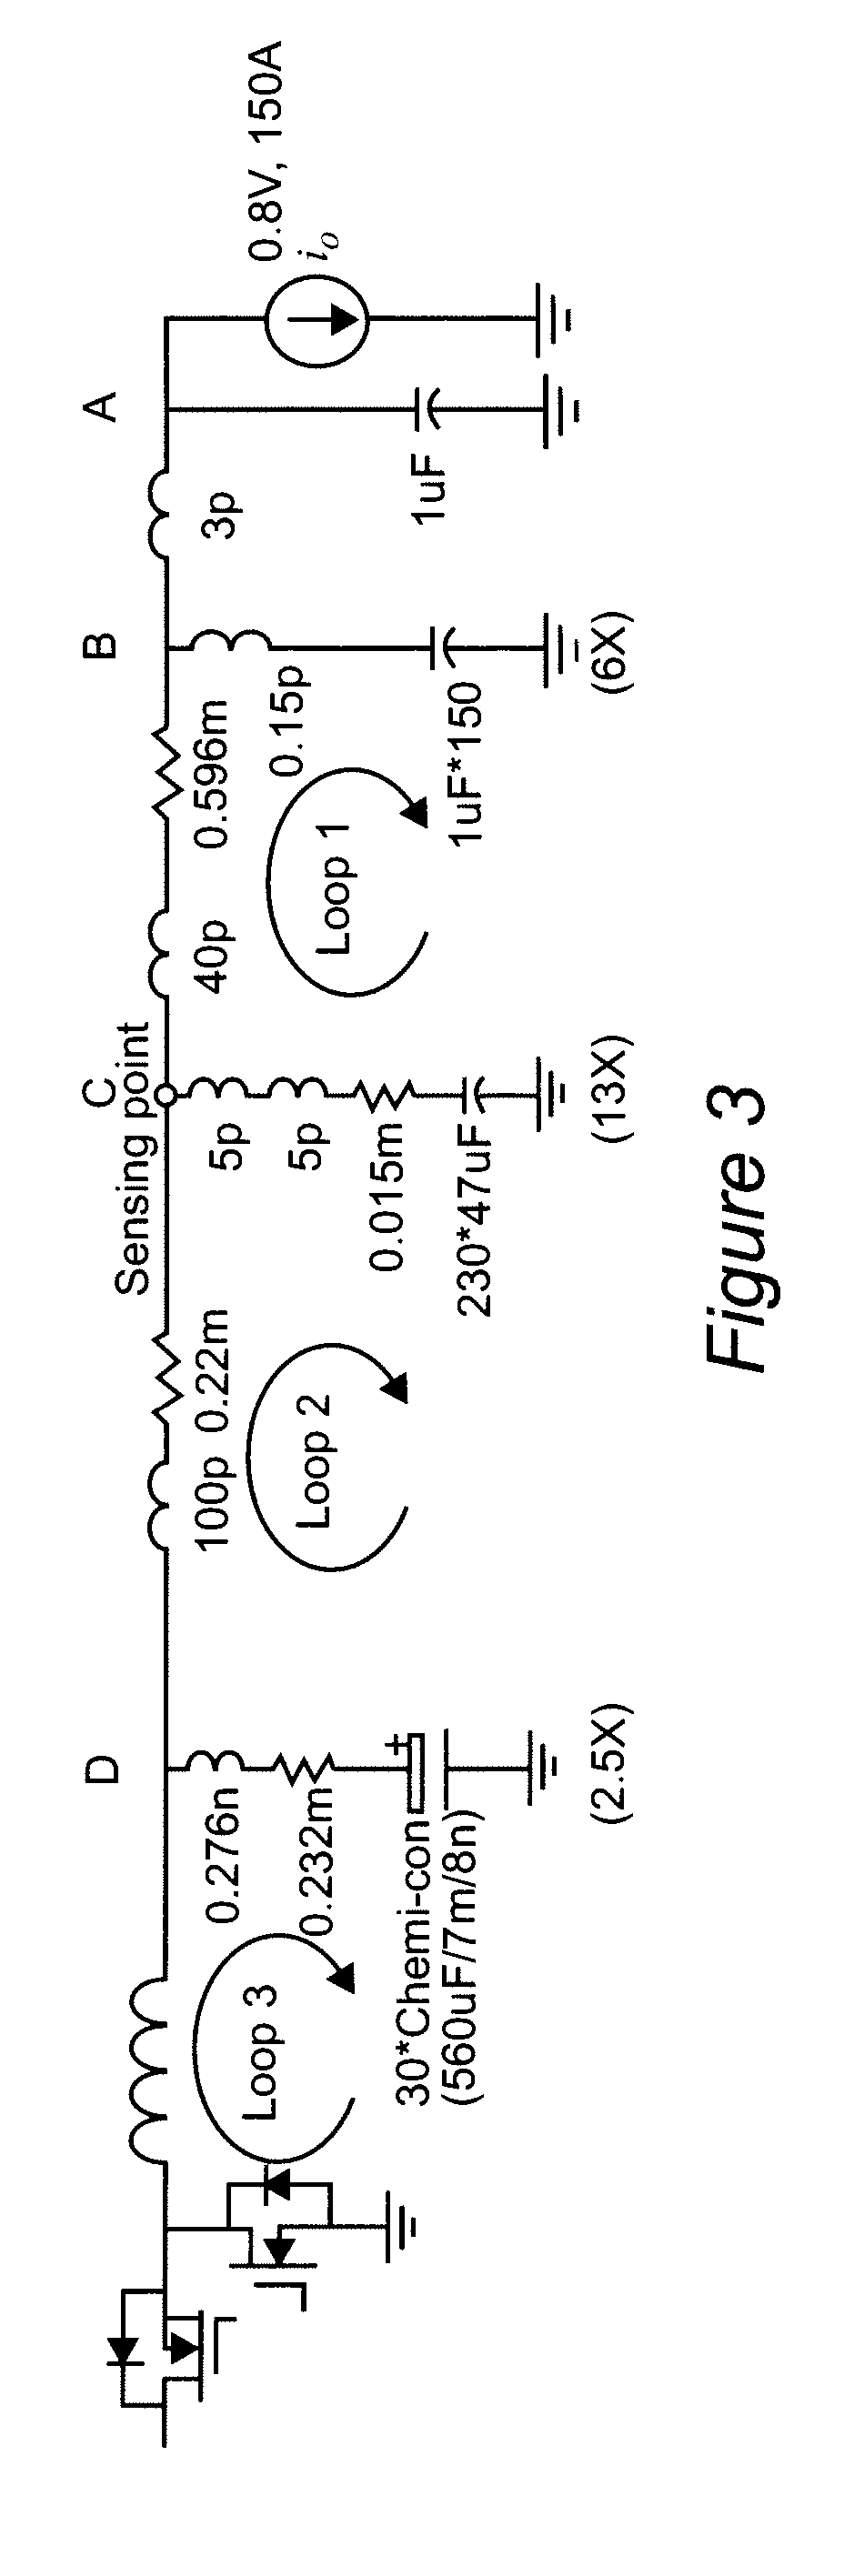 Hybrid filter for high slew rate output current application